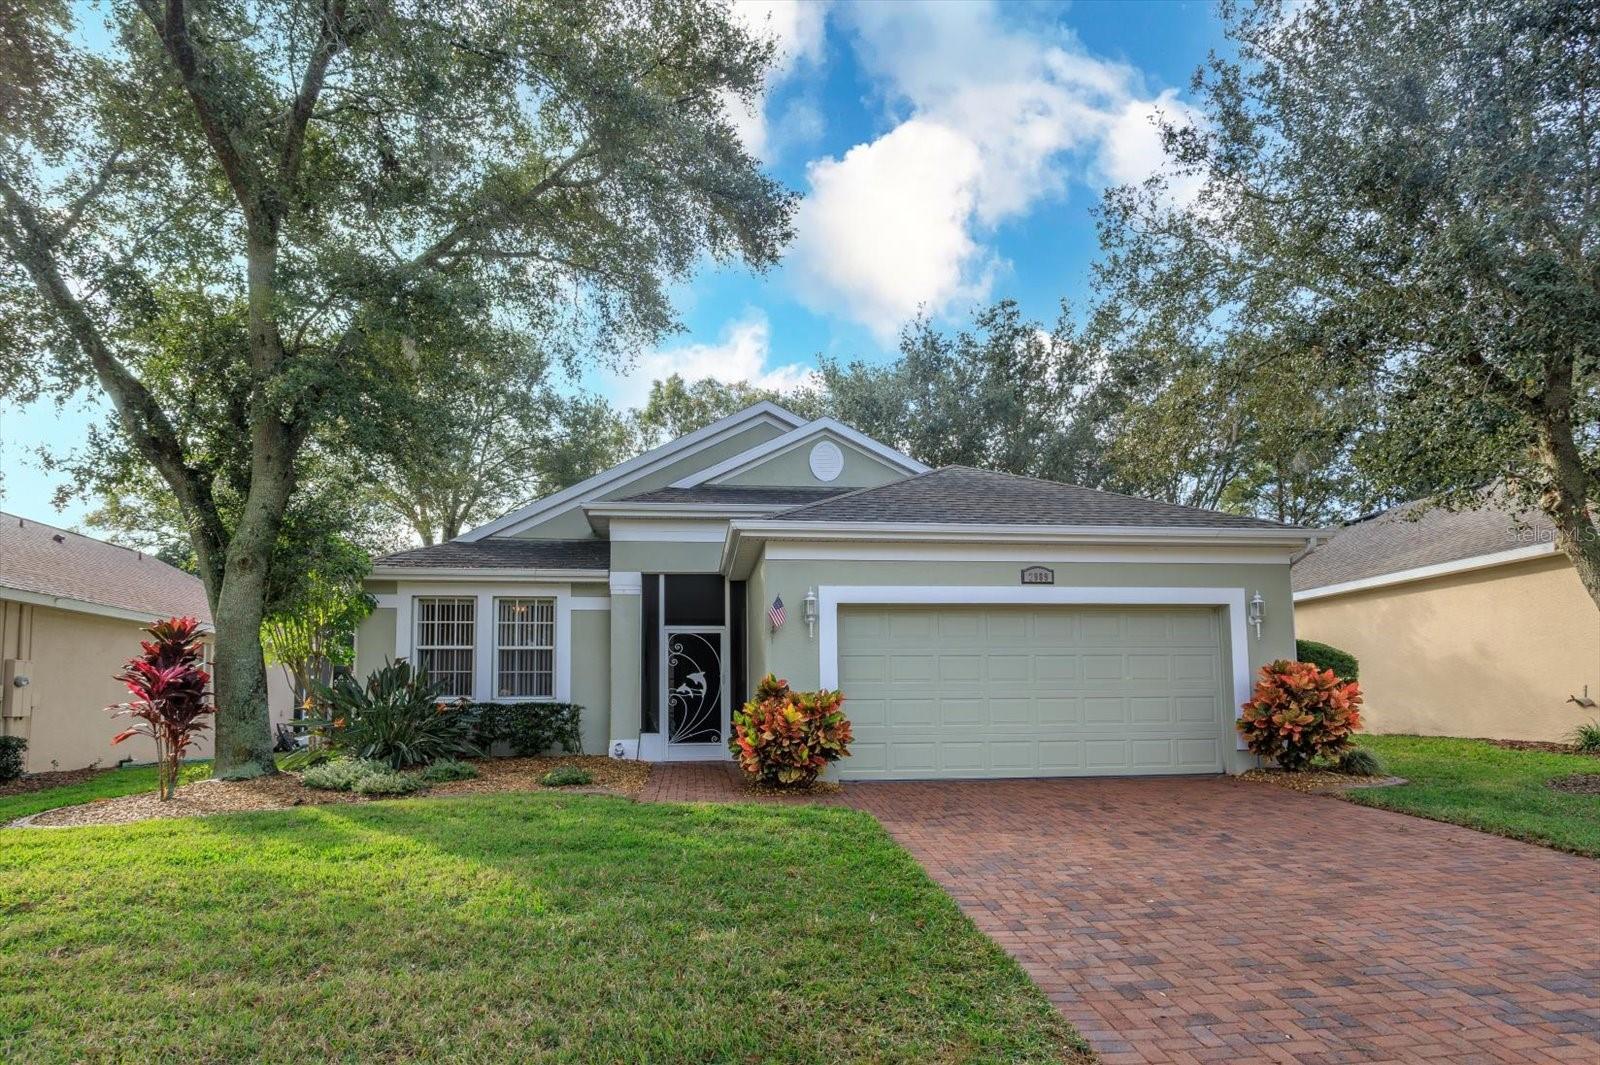 Photo one of 2989 Pinnacle Ct Clermont FL 34711 | MLS O6171400